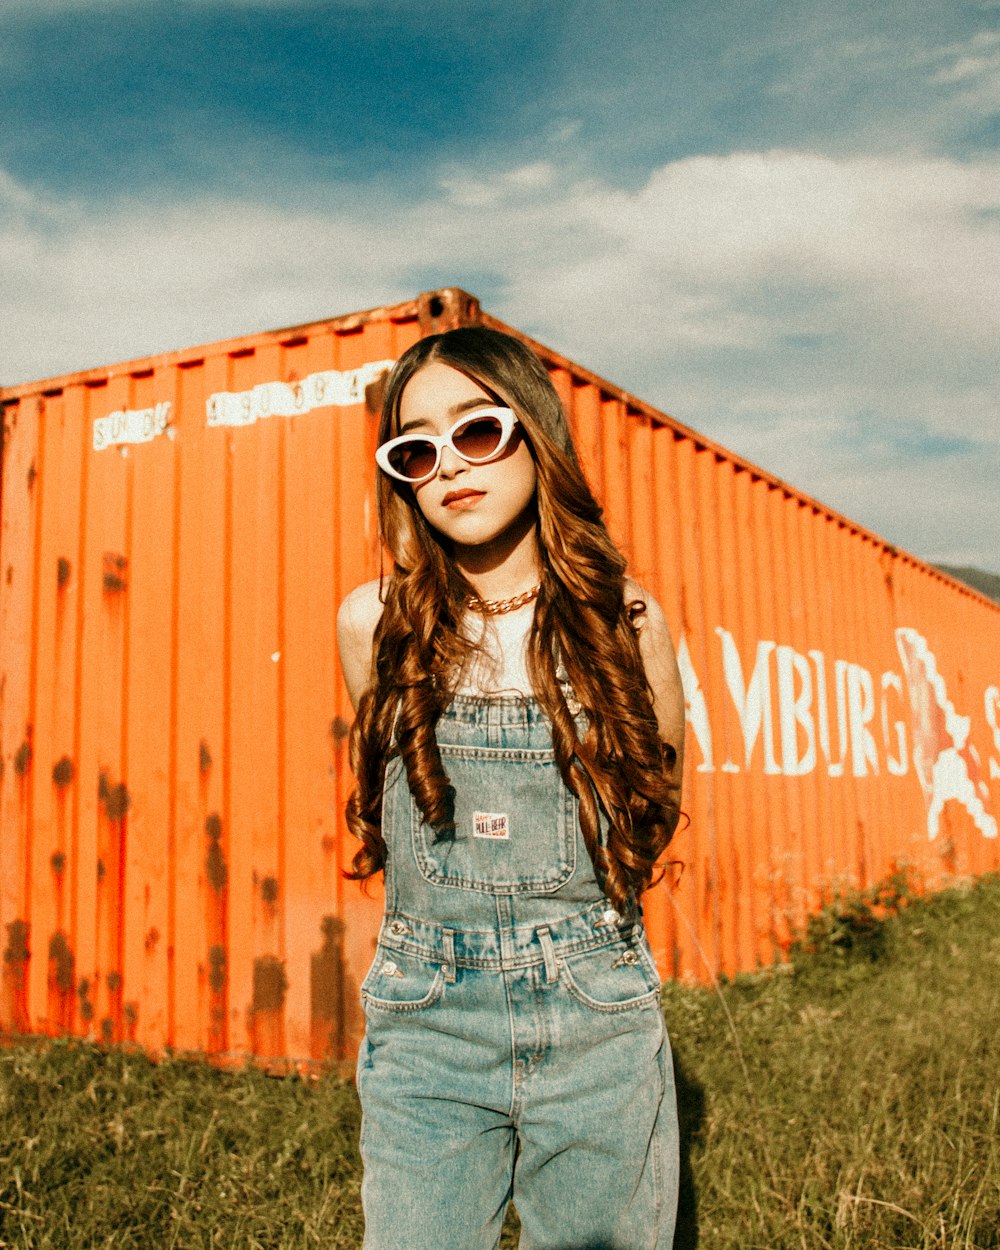 a girl in overalls standing in front of an orange building